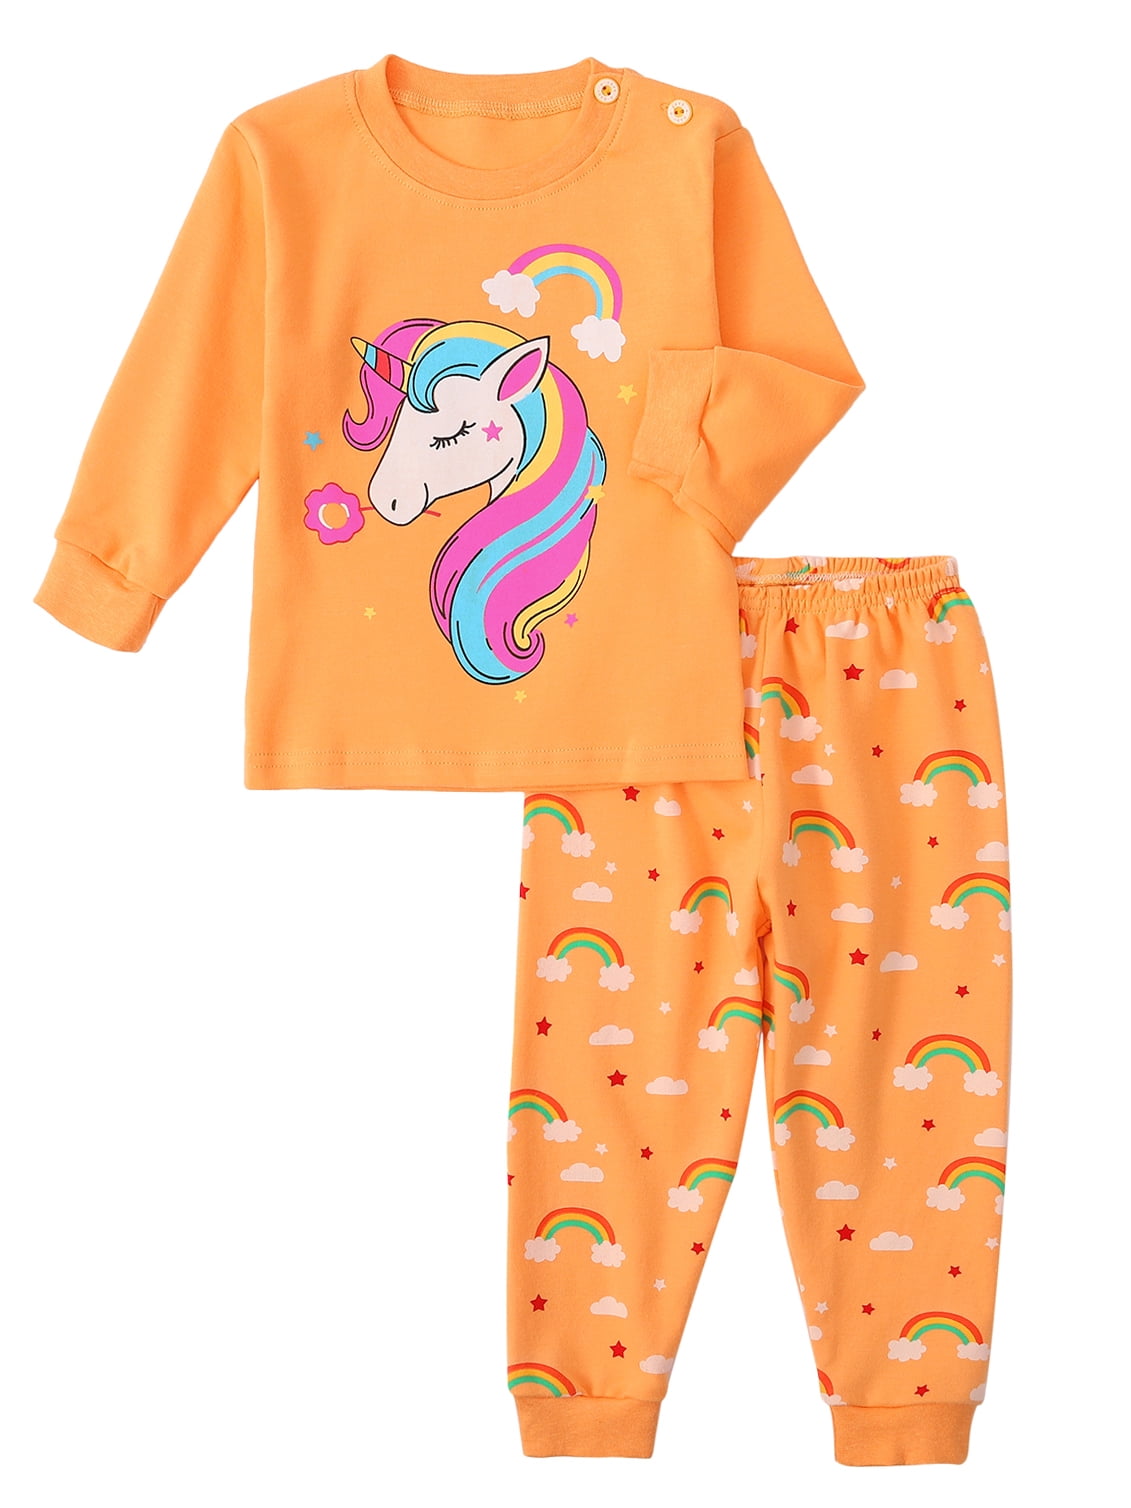 Toddler Baby Girls Snug Fit 2 Pc Set Unicorn Design Long Puff Sleeve Top and Pants 